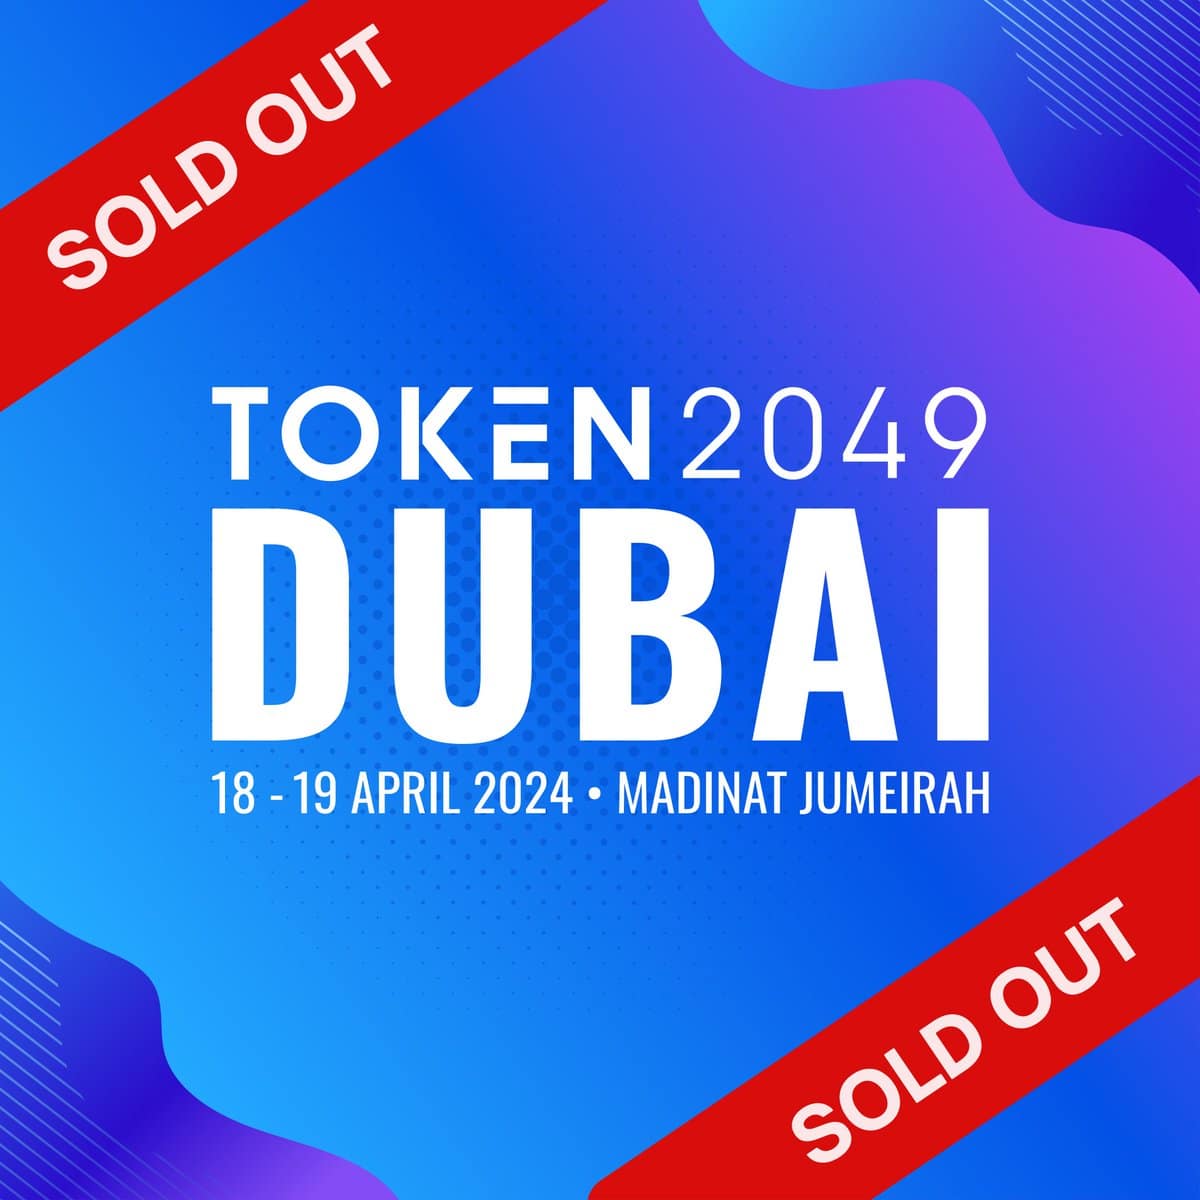 The event TOKEN2049 announces it is officially sold out